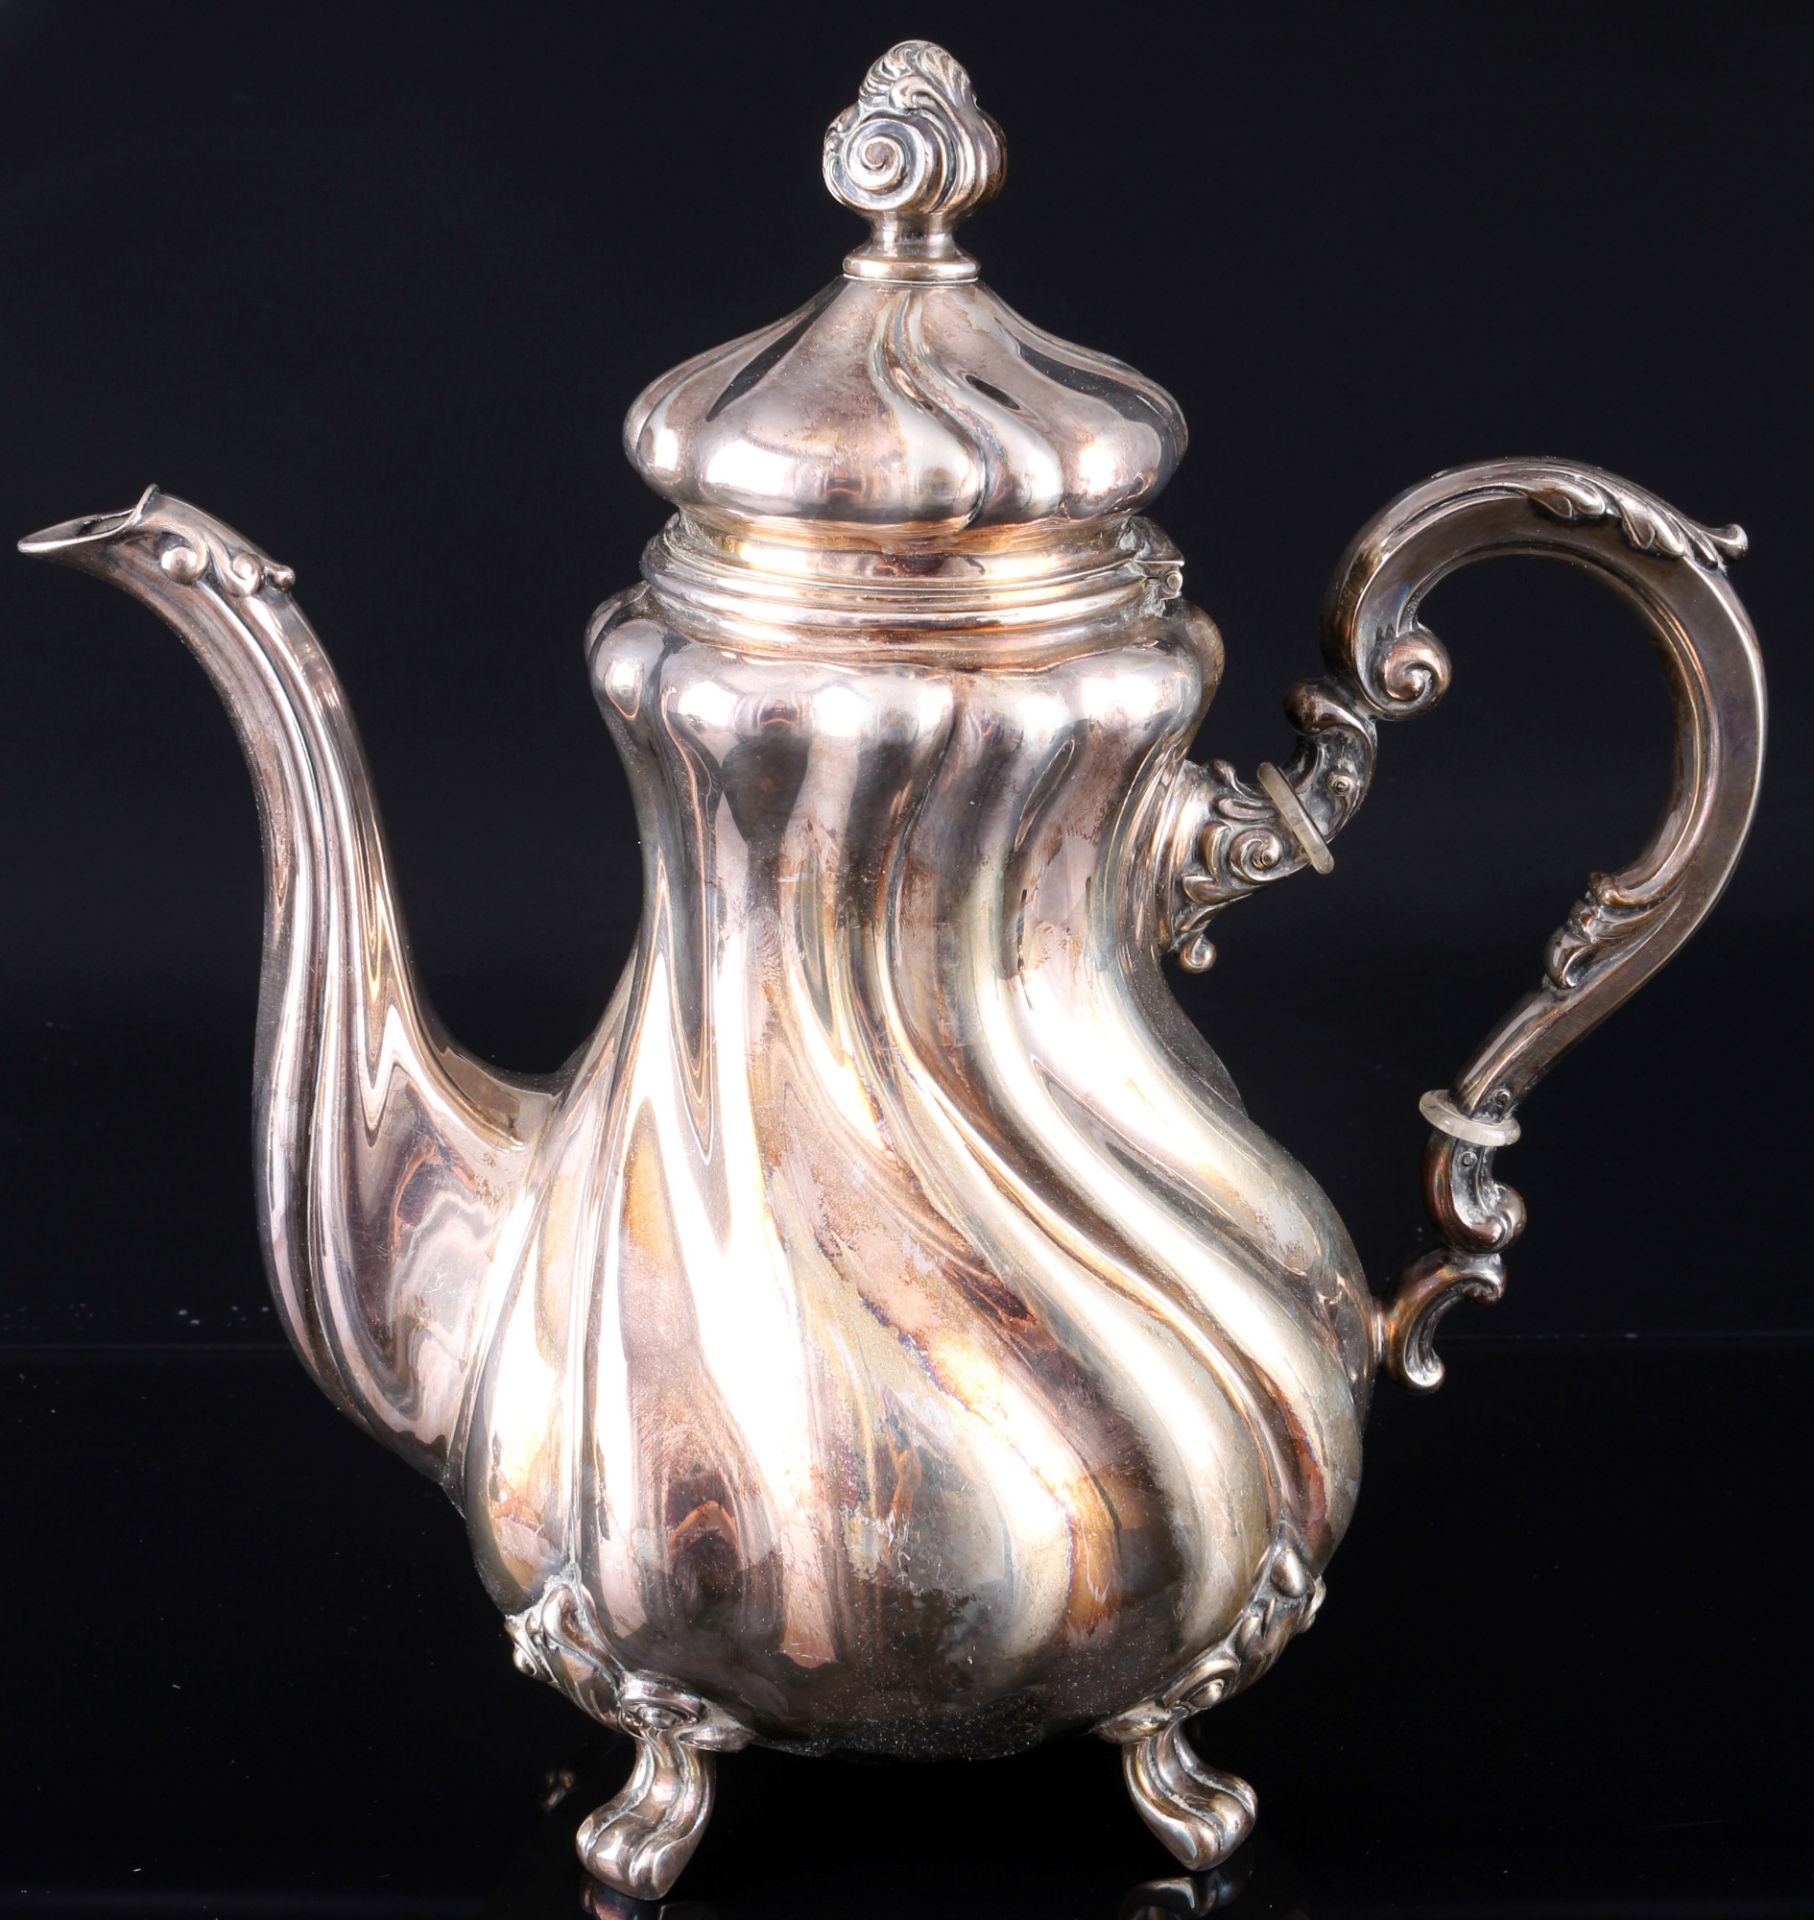 C.Tewes 800 silver coffee set, Silber Kaffeeservice, - Image 2 of 5